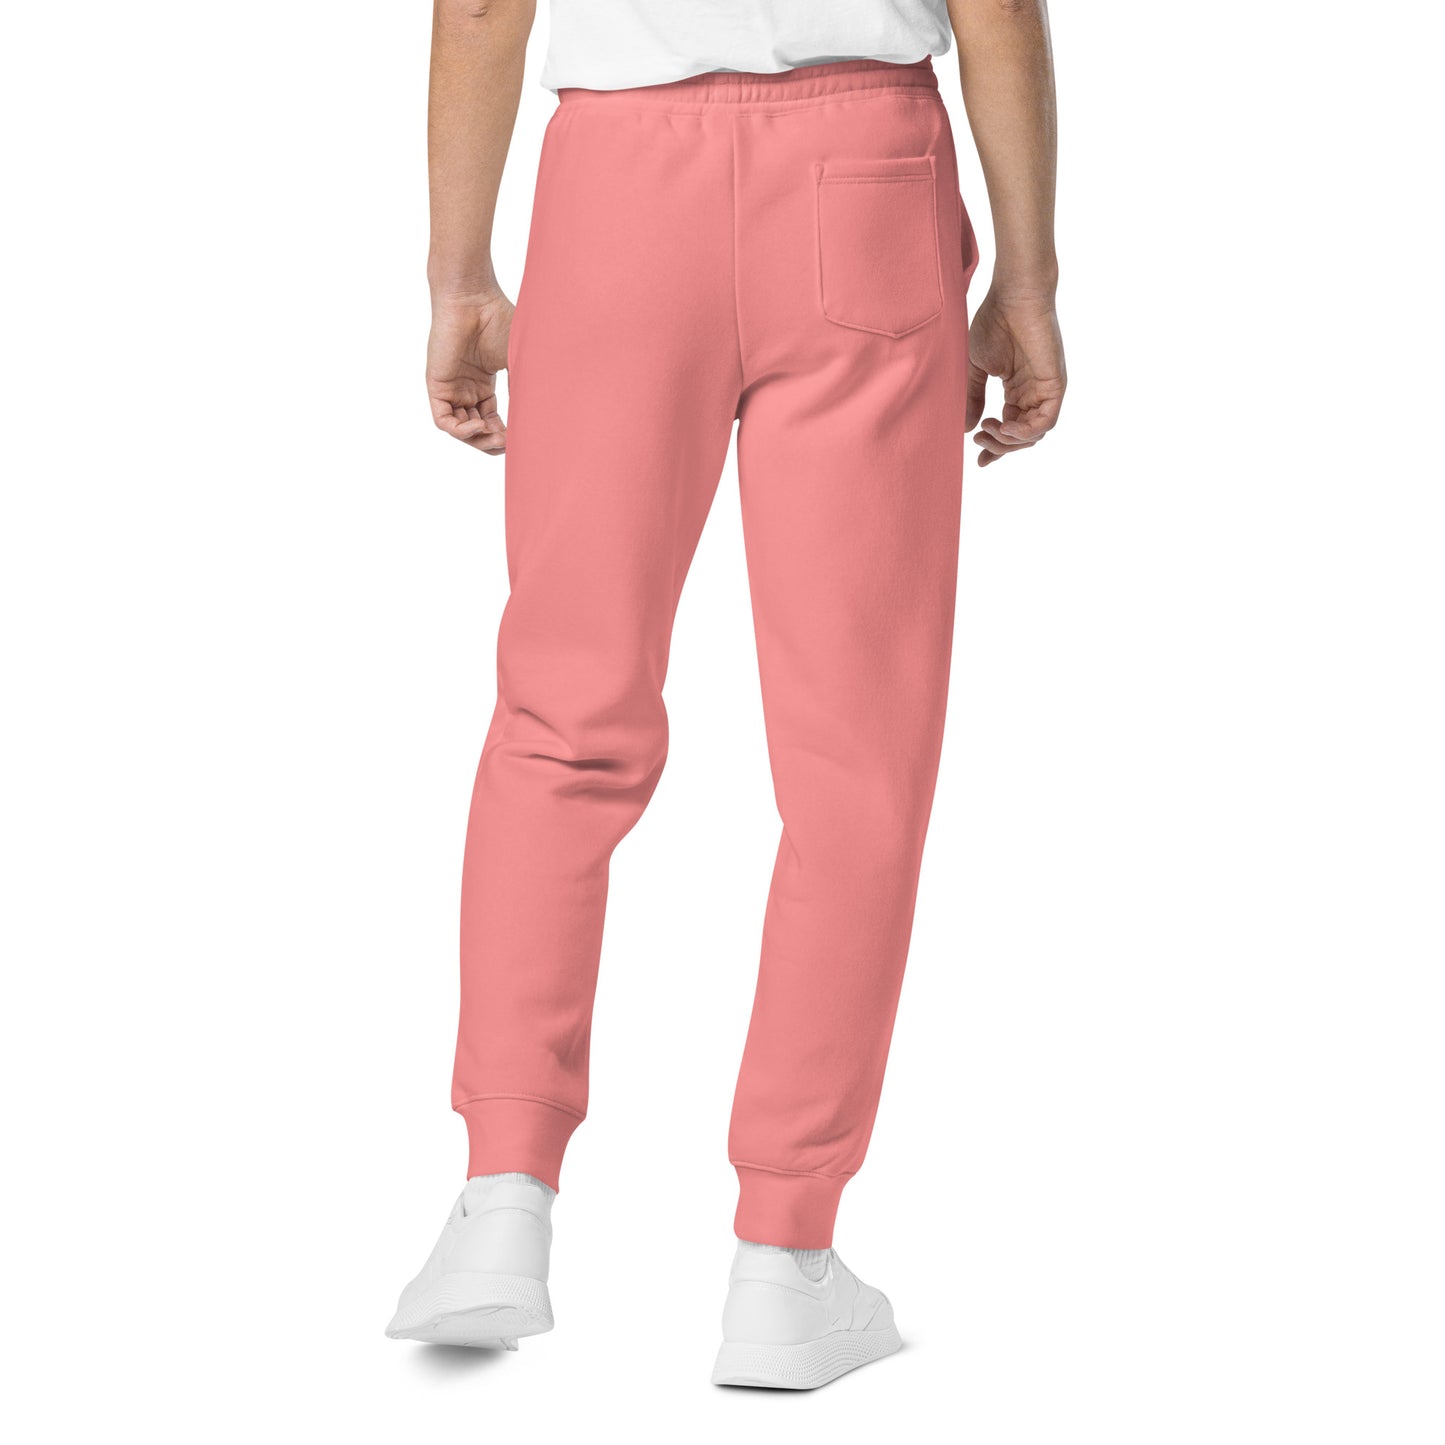 VEGAN For Them Unisex Pigment-Dyed Embroidered Sweatpants